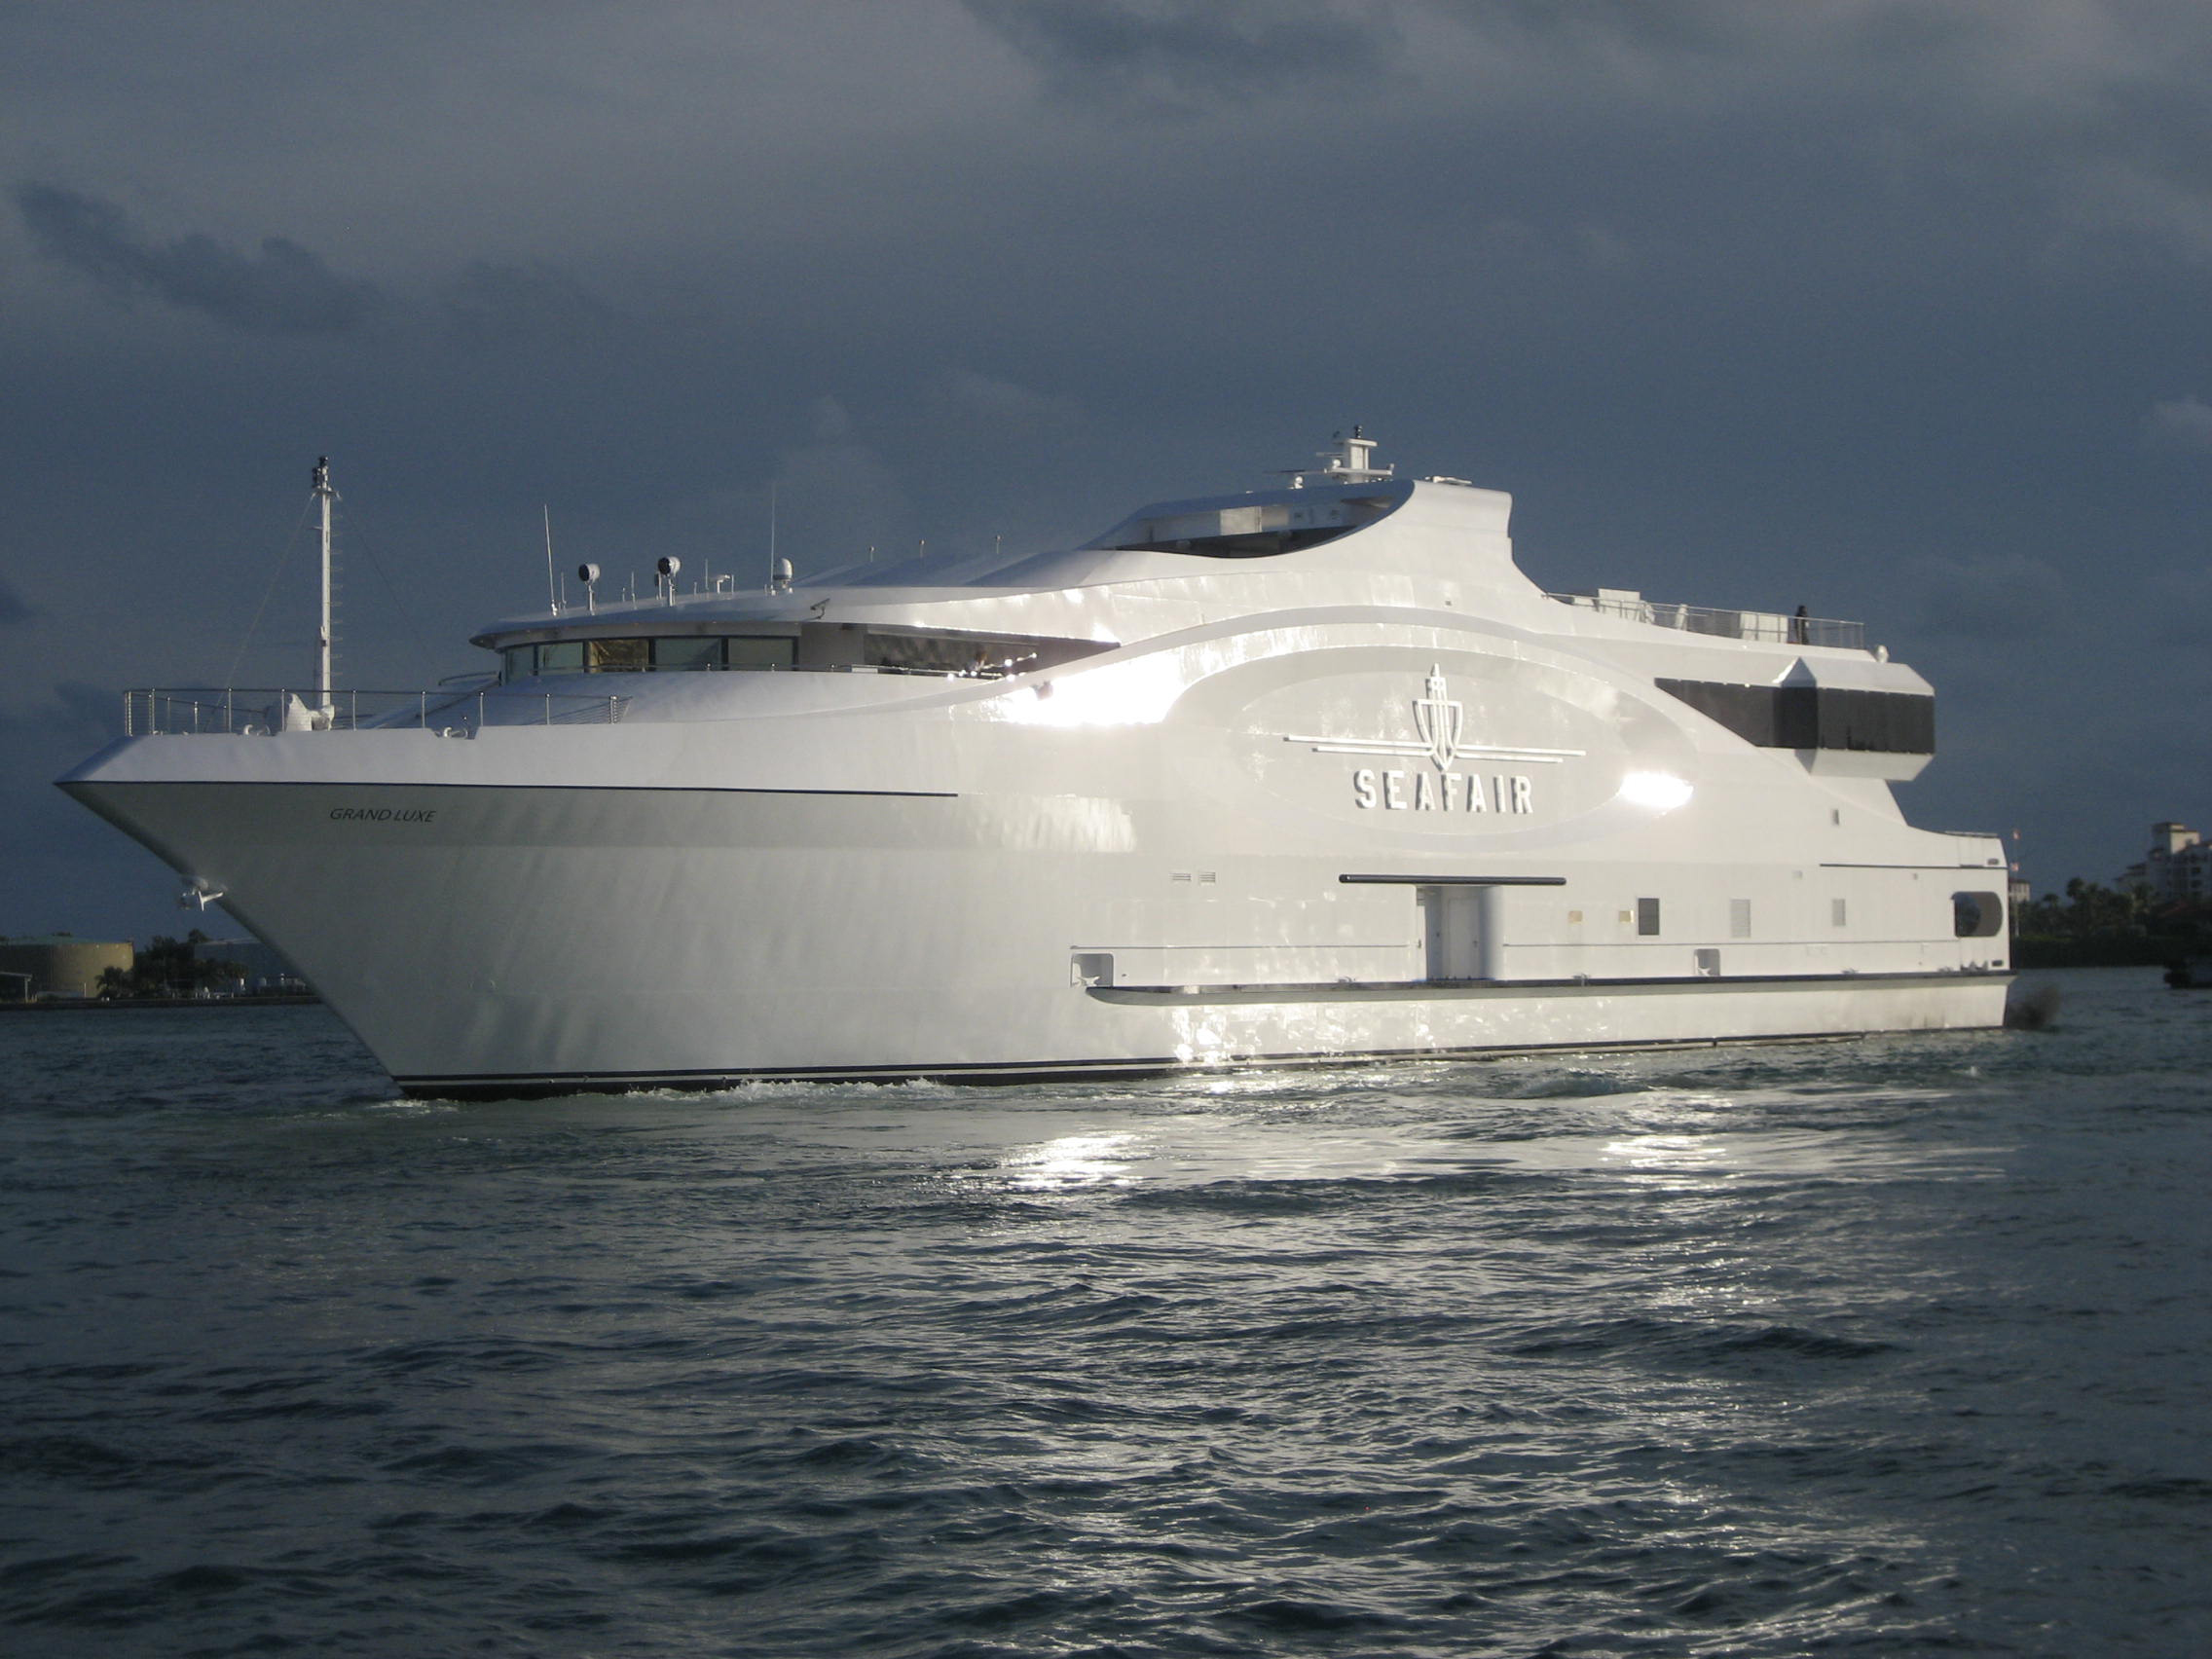 grand luxe yacht